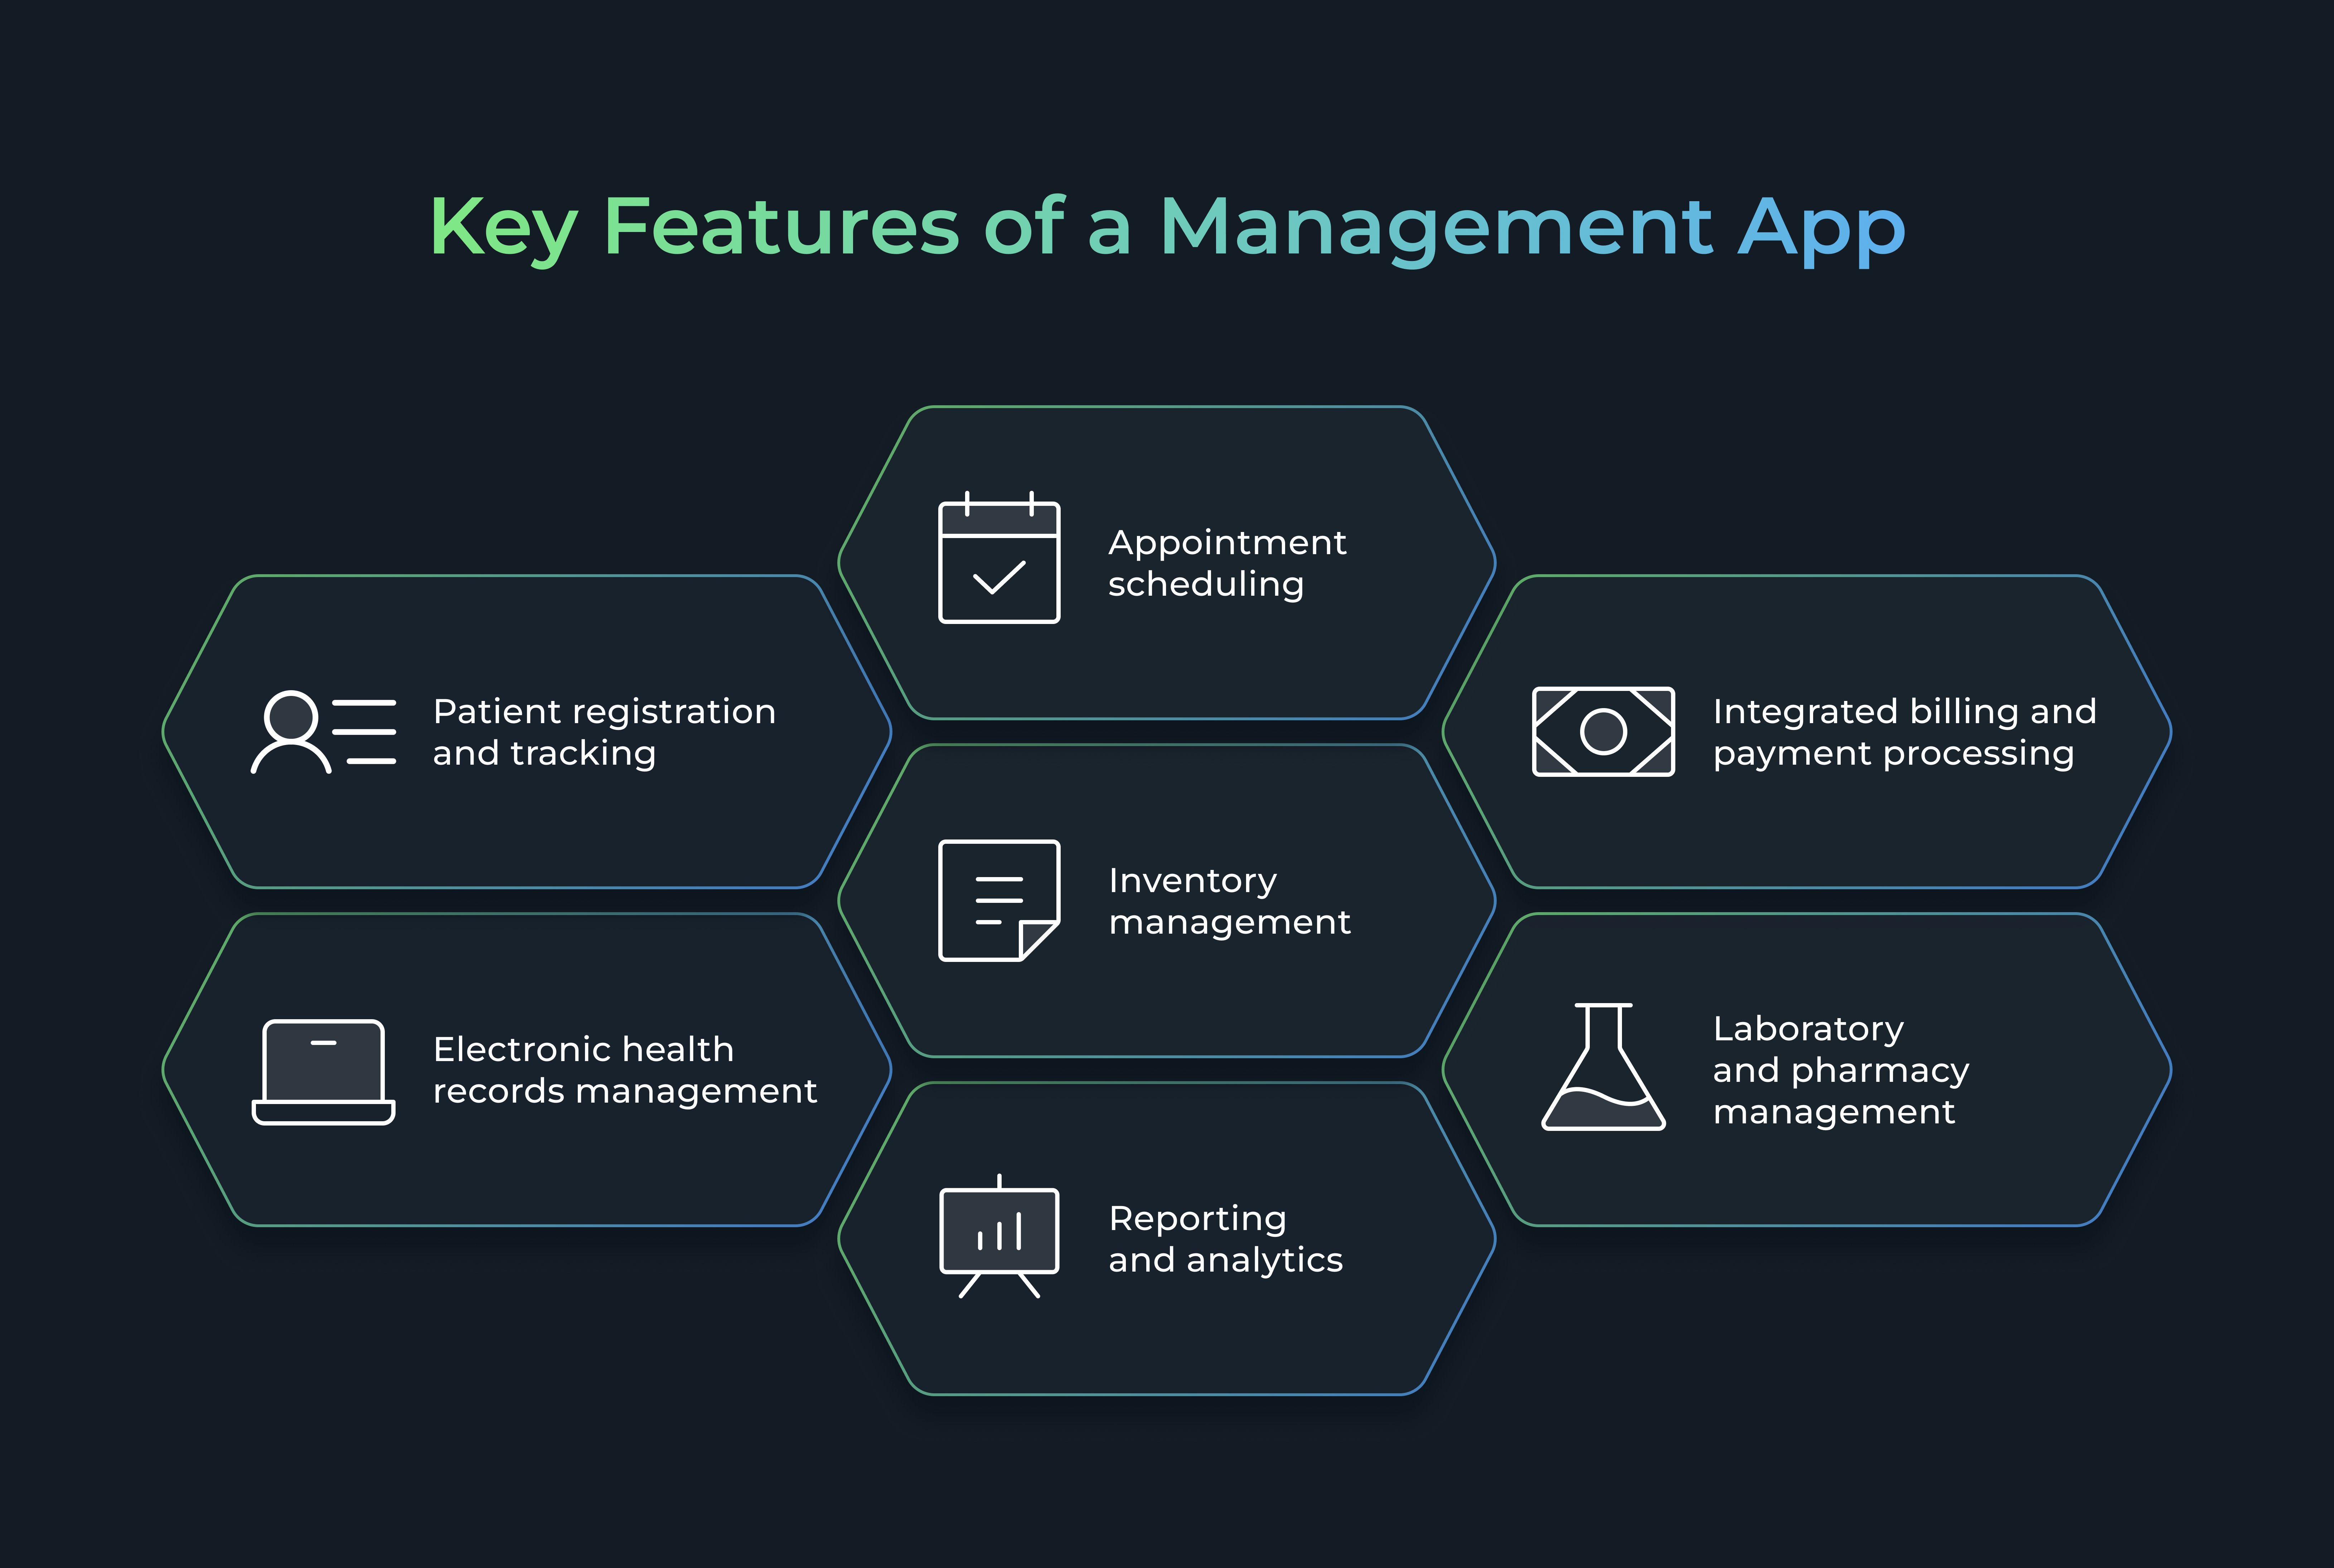  Key Features of a Management App: Appointment scheduling, Patient registration and tracking, Electronic health records management, Integrated billing and payment processing, Laboratory and pharmacy management, Inventory management, Reporting and analytics
